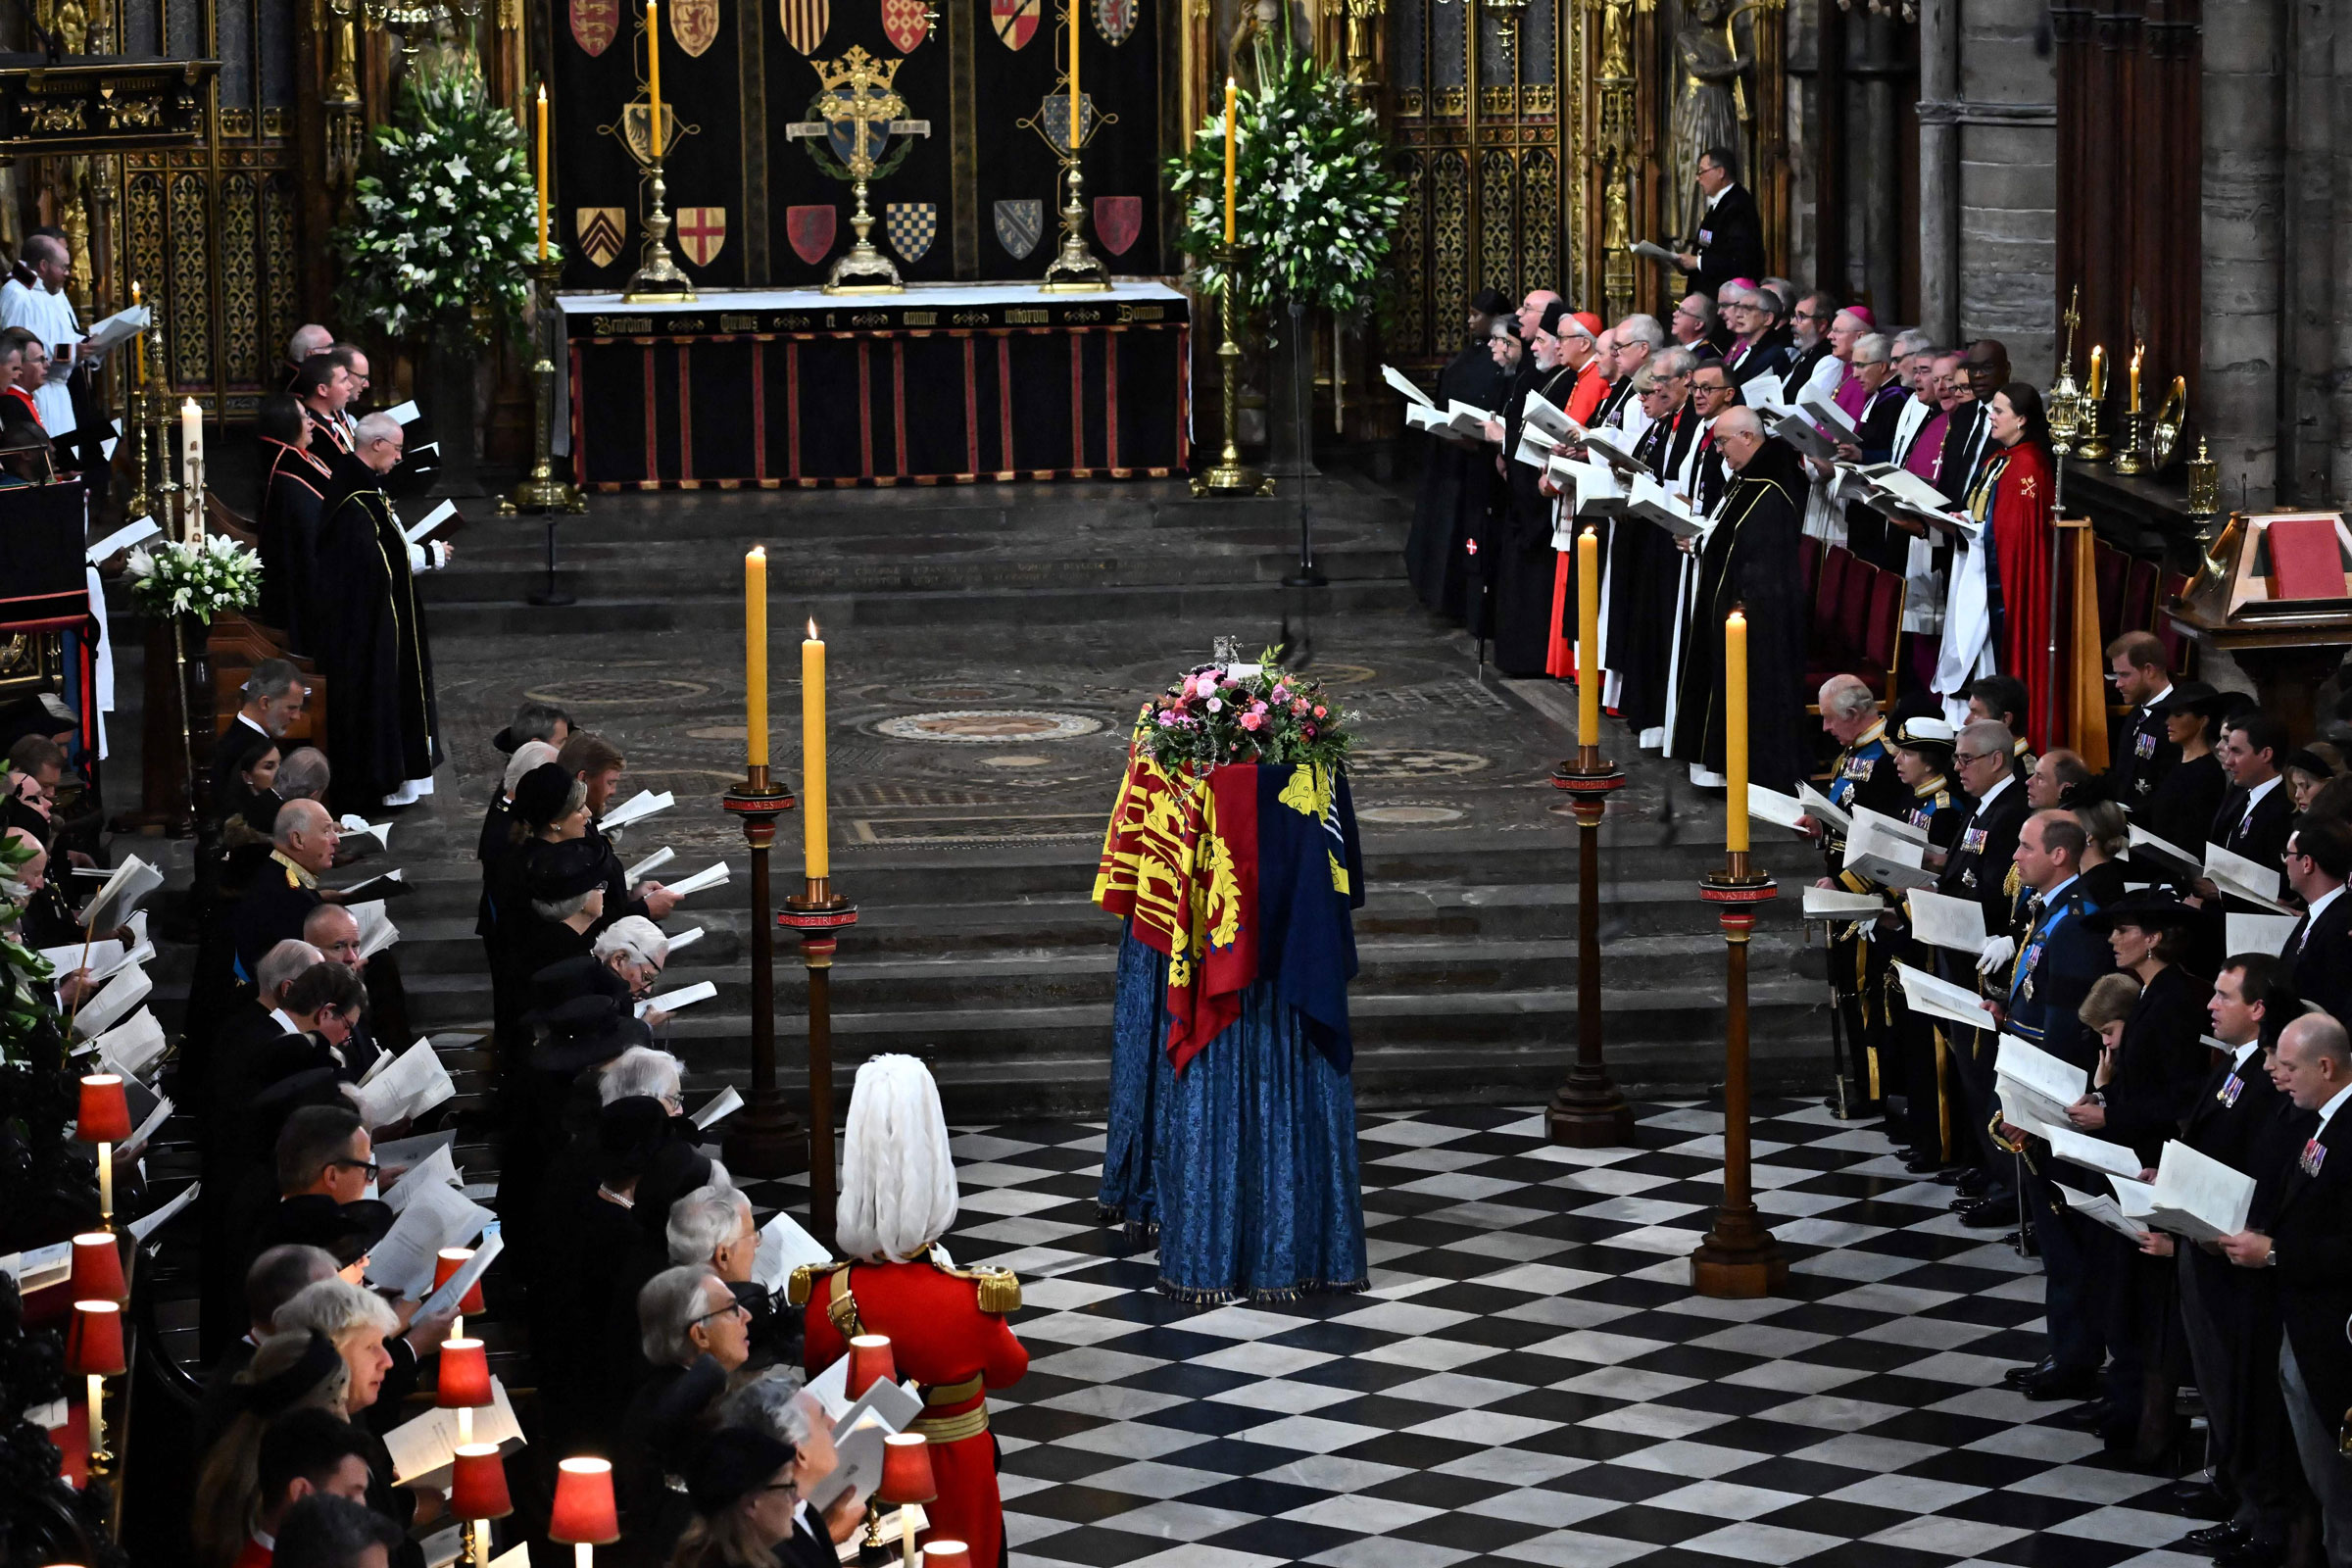 Members of the Royal family and guests sing as the coffin of Queen Elizabeth II, draped in the Royal Standard, lies by the altar during the State Funeral Service for Britain's Queen Elizabeth II at Westminster Abbey in London.